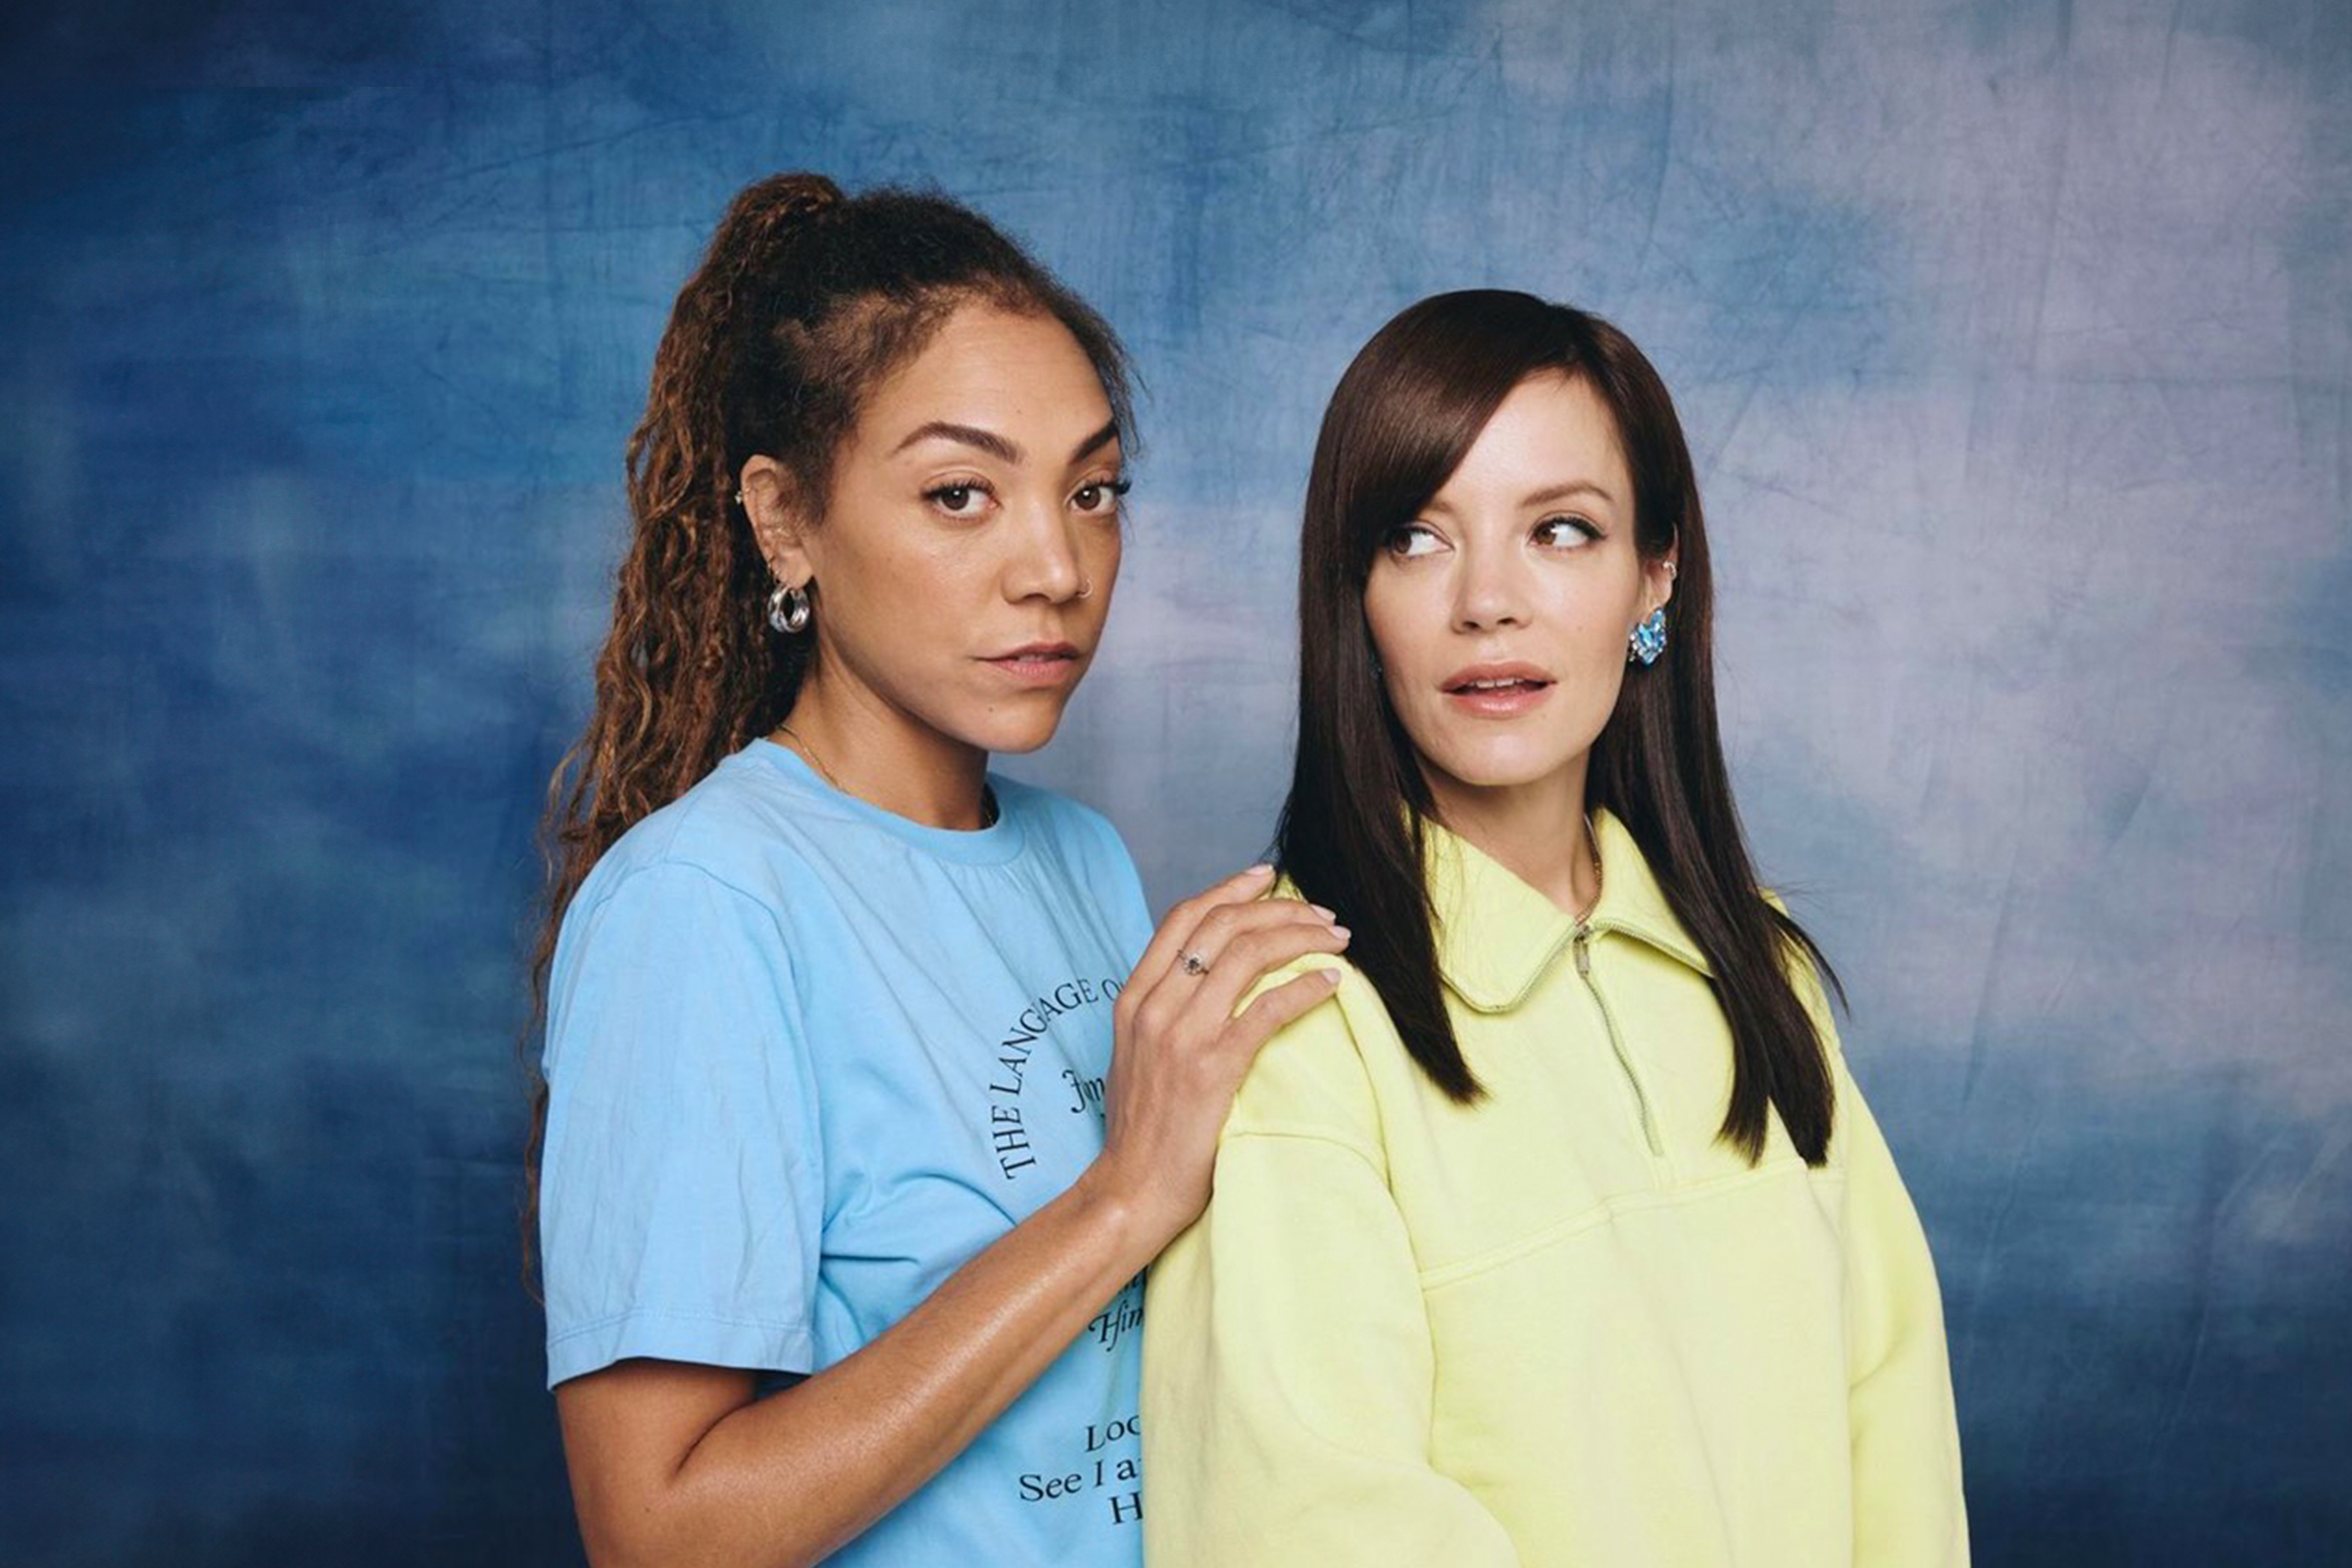 New BBC Sounds podcast Miss Me? features childhood friends Lily Allen and Miquita Oliver (BBC Sounds/PA)